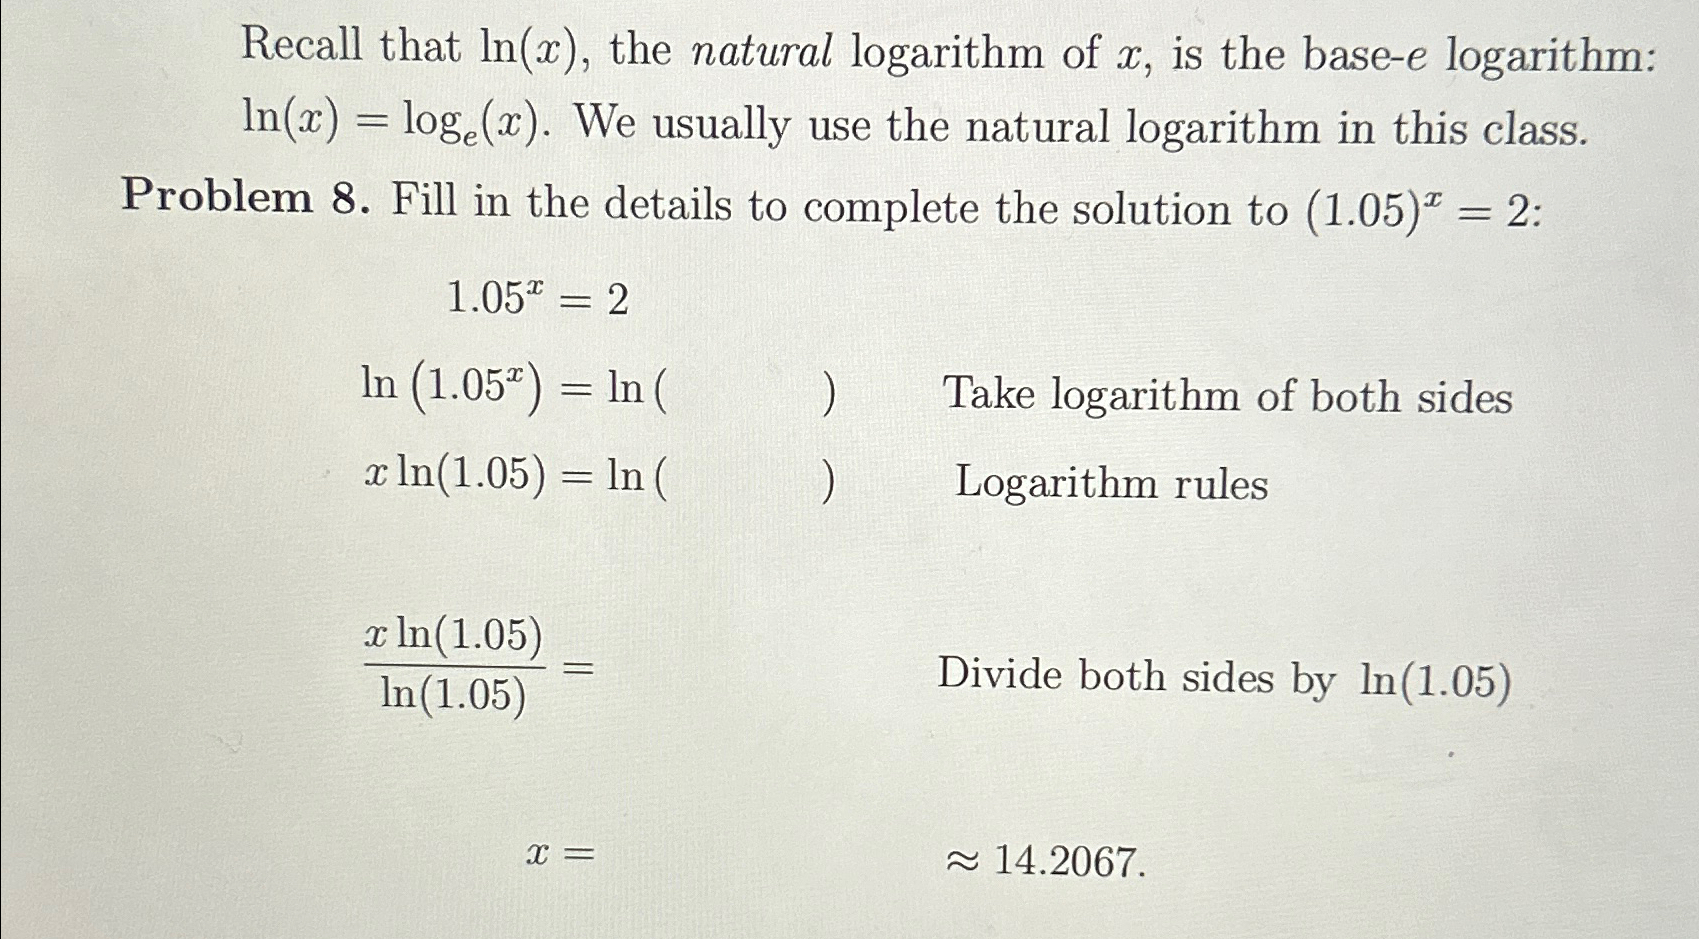 natural logarithm rules